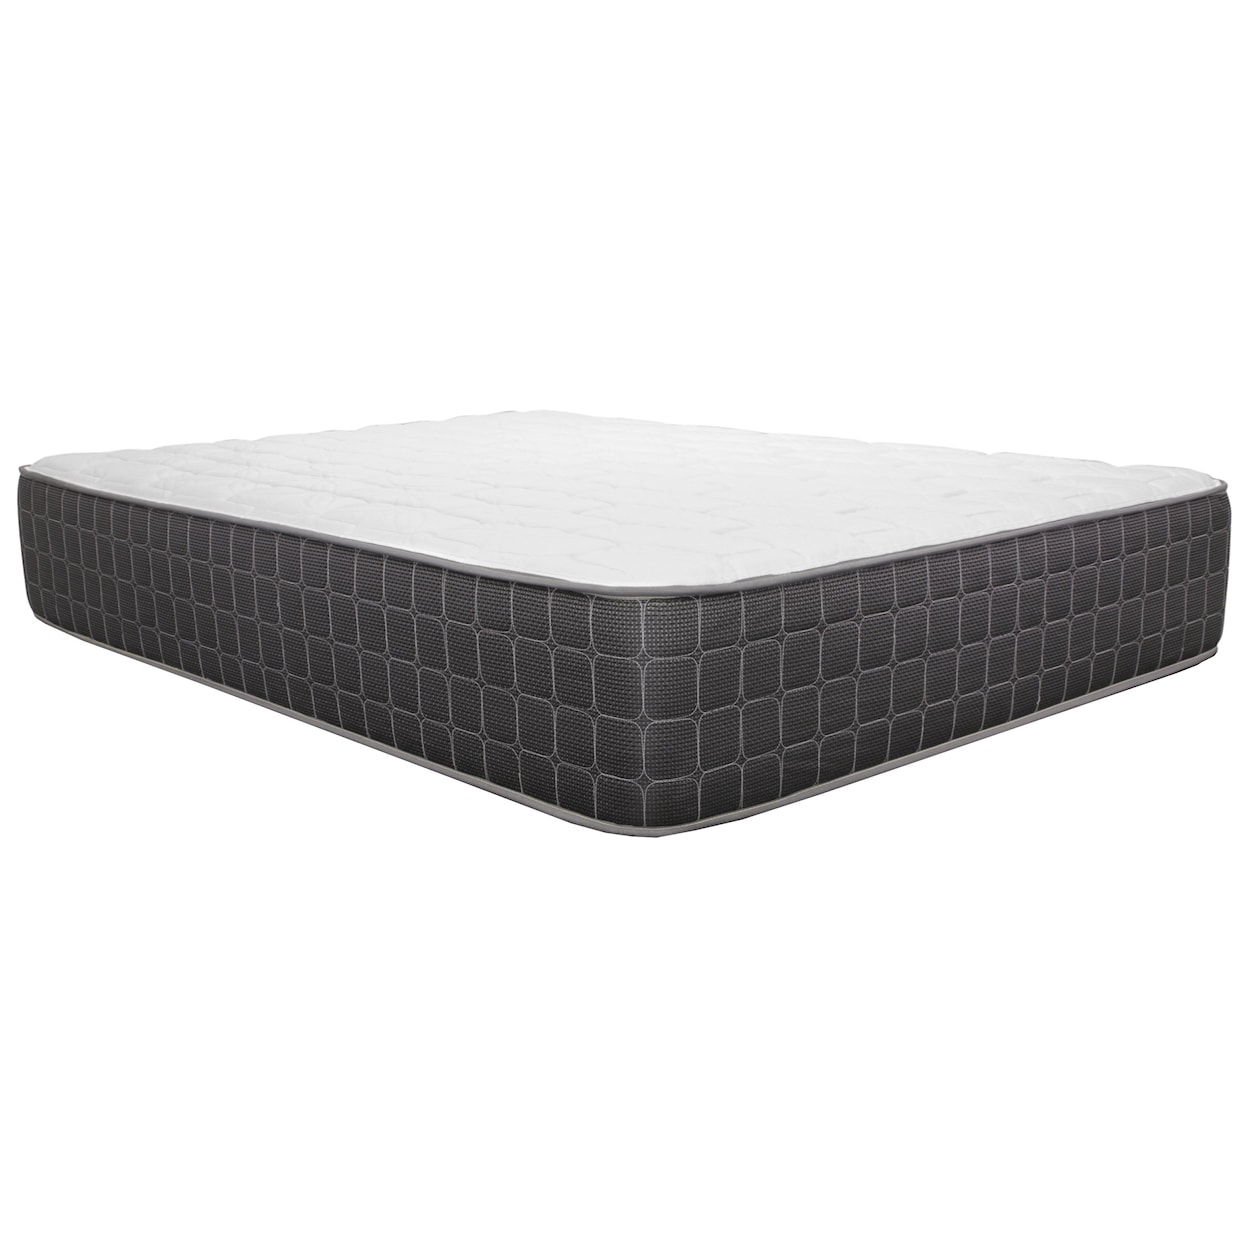 Corsicana 1700 Kingsmere Twin 13.5" Firm Pocketed Coil Mattress